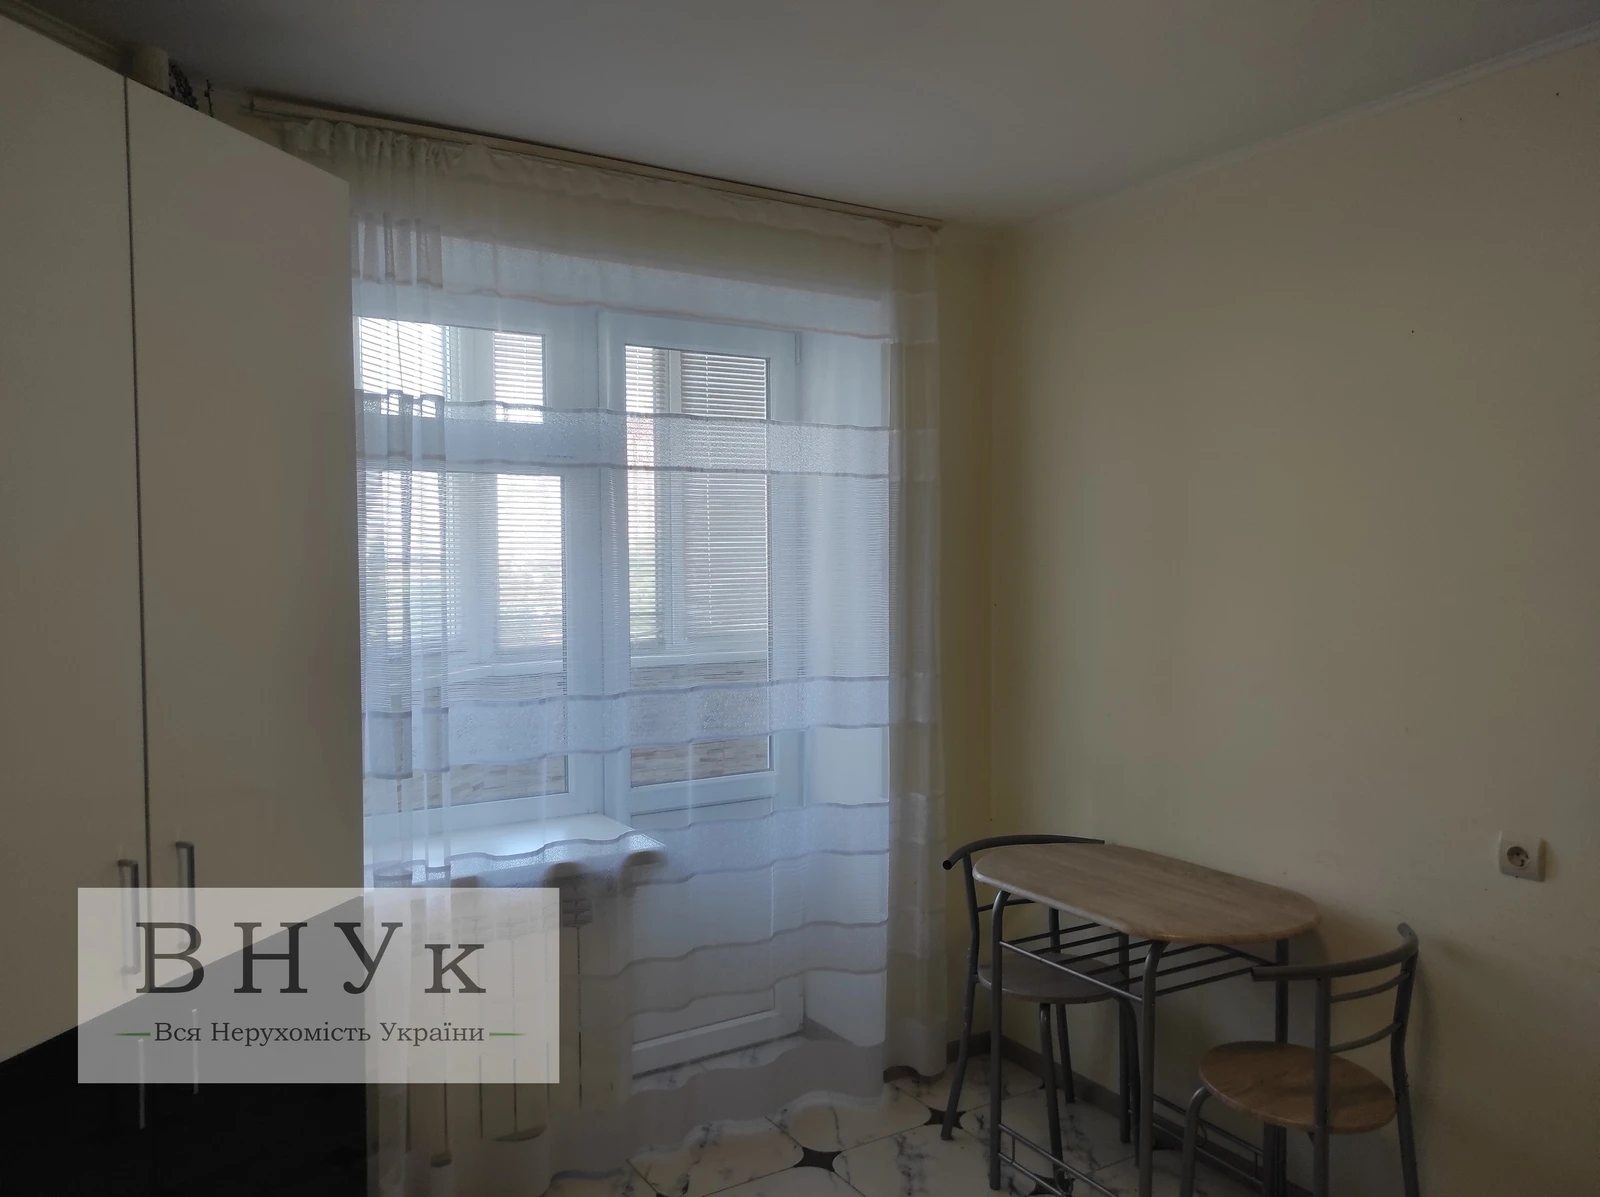 Apartments for sale. 2 rooms, 63 m², 3rd floor/10 floors. Troleybusna vul., Ternopil. 